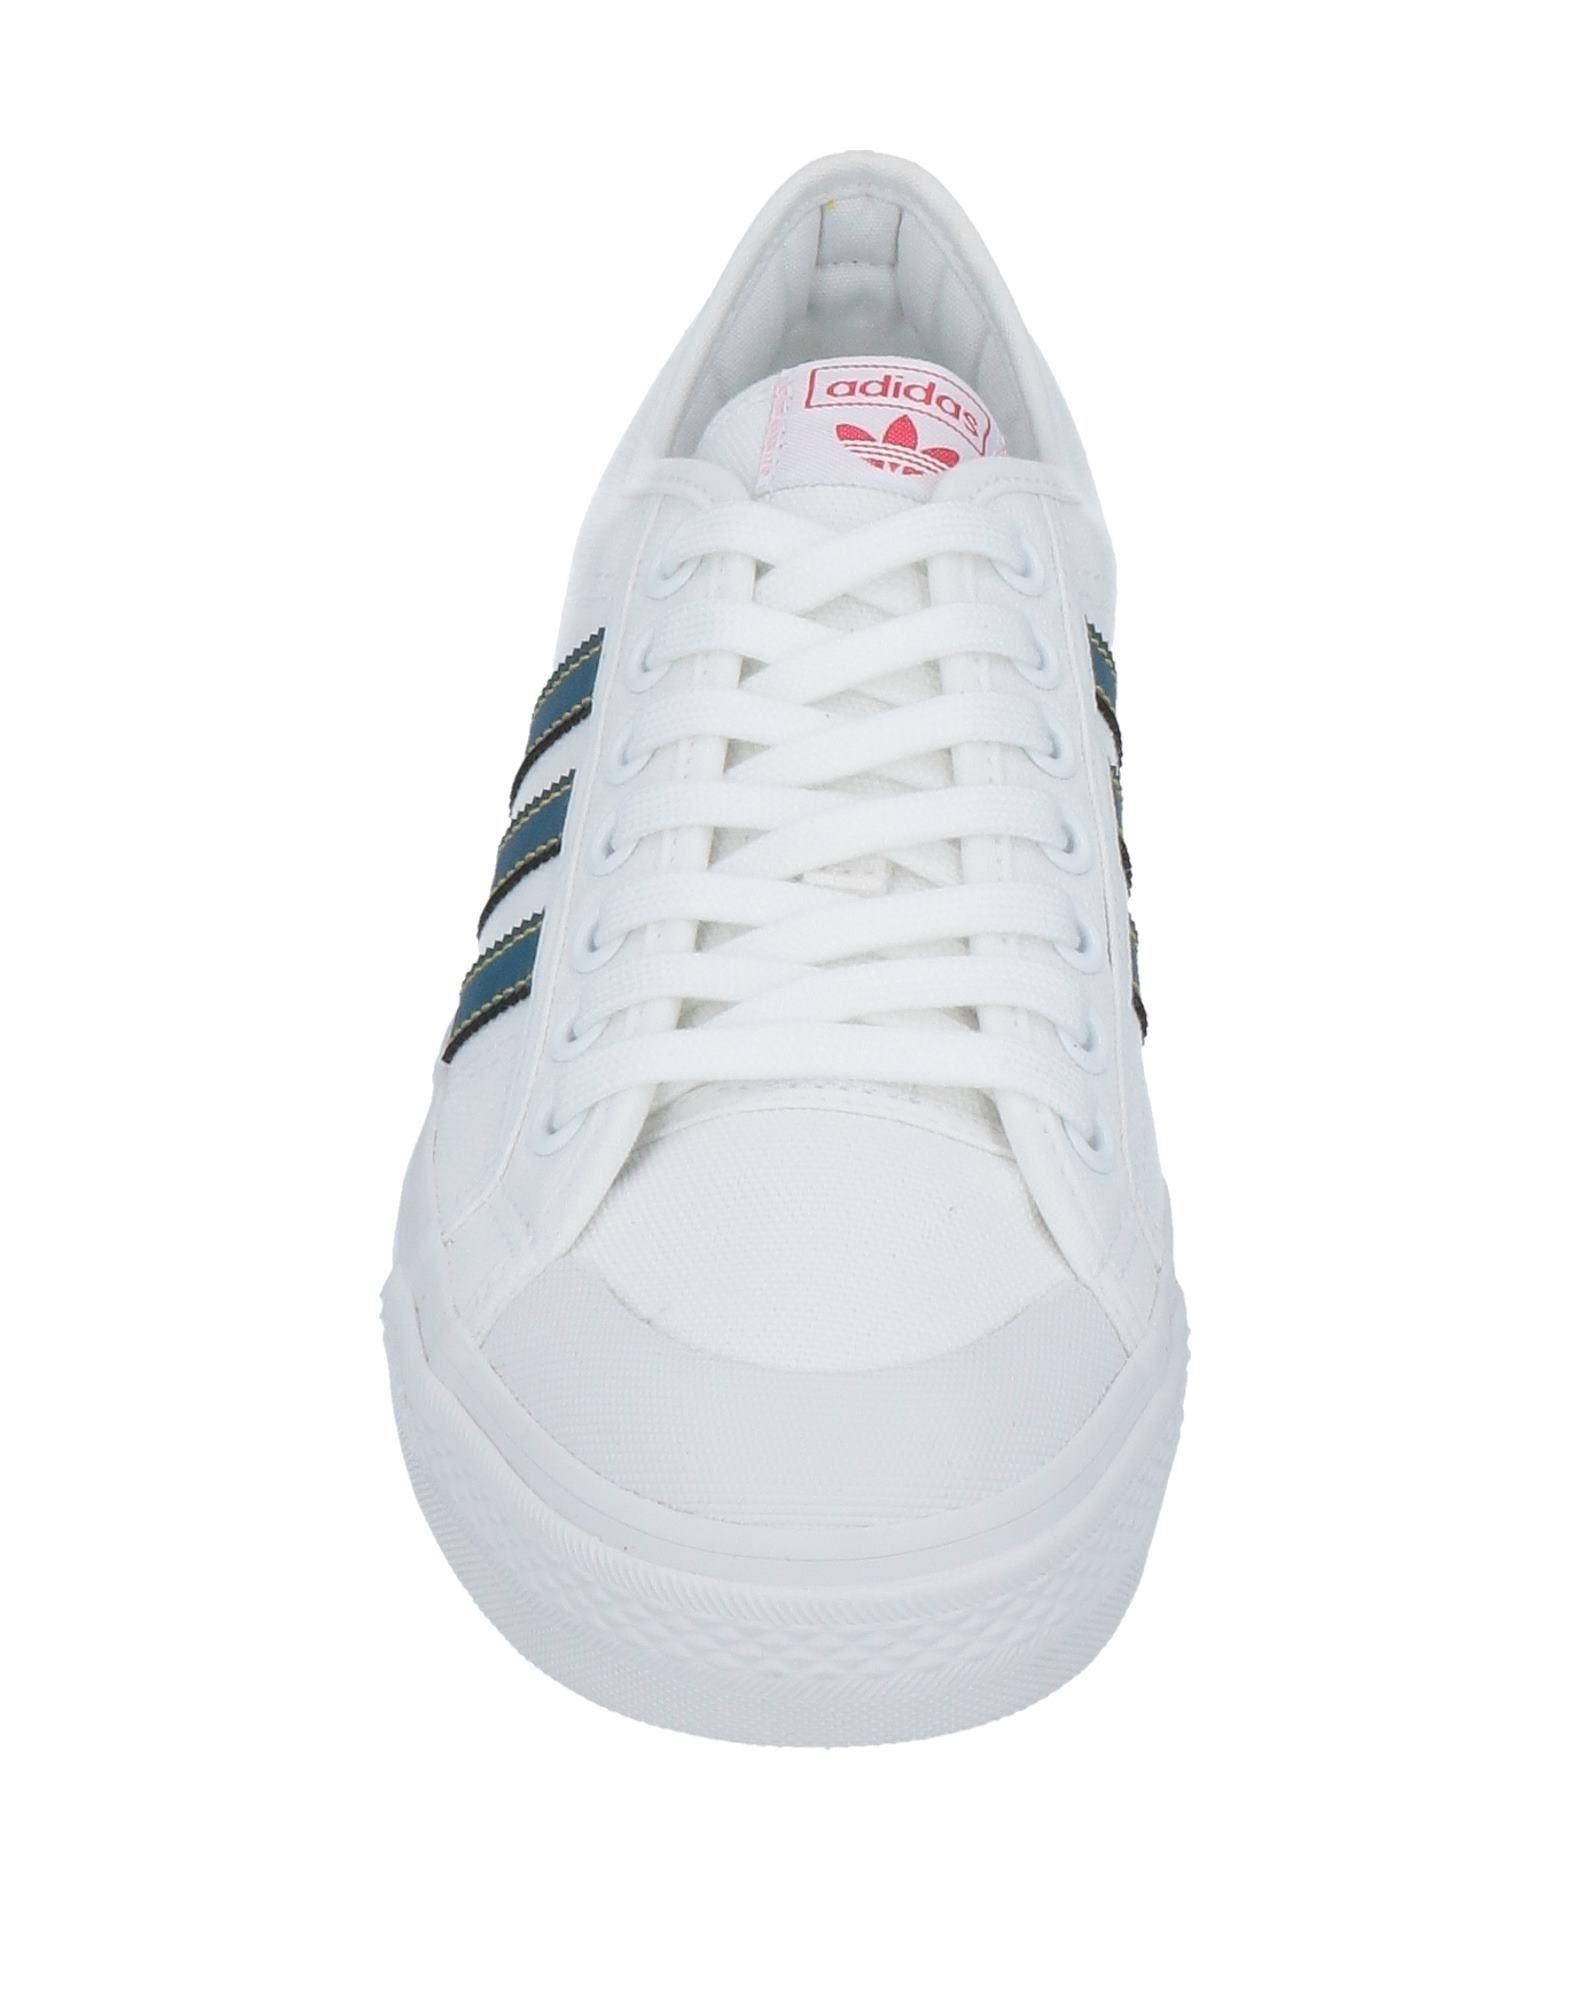 adidas Originals Canvas Low-tops & Sneakers in White for Men - Lyst